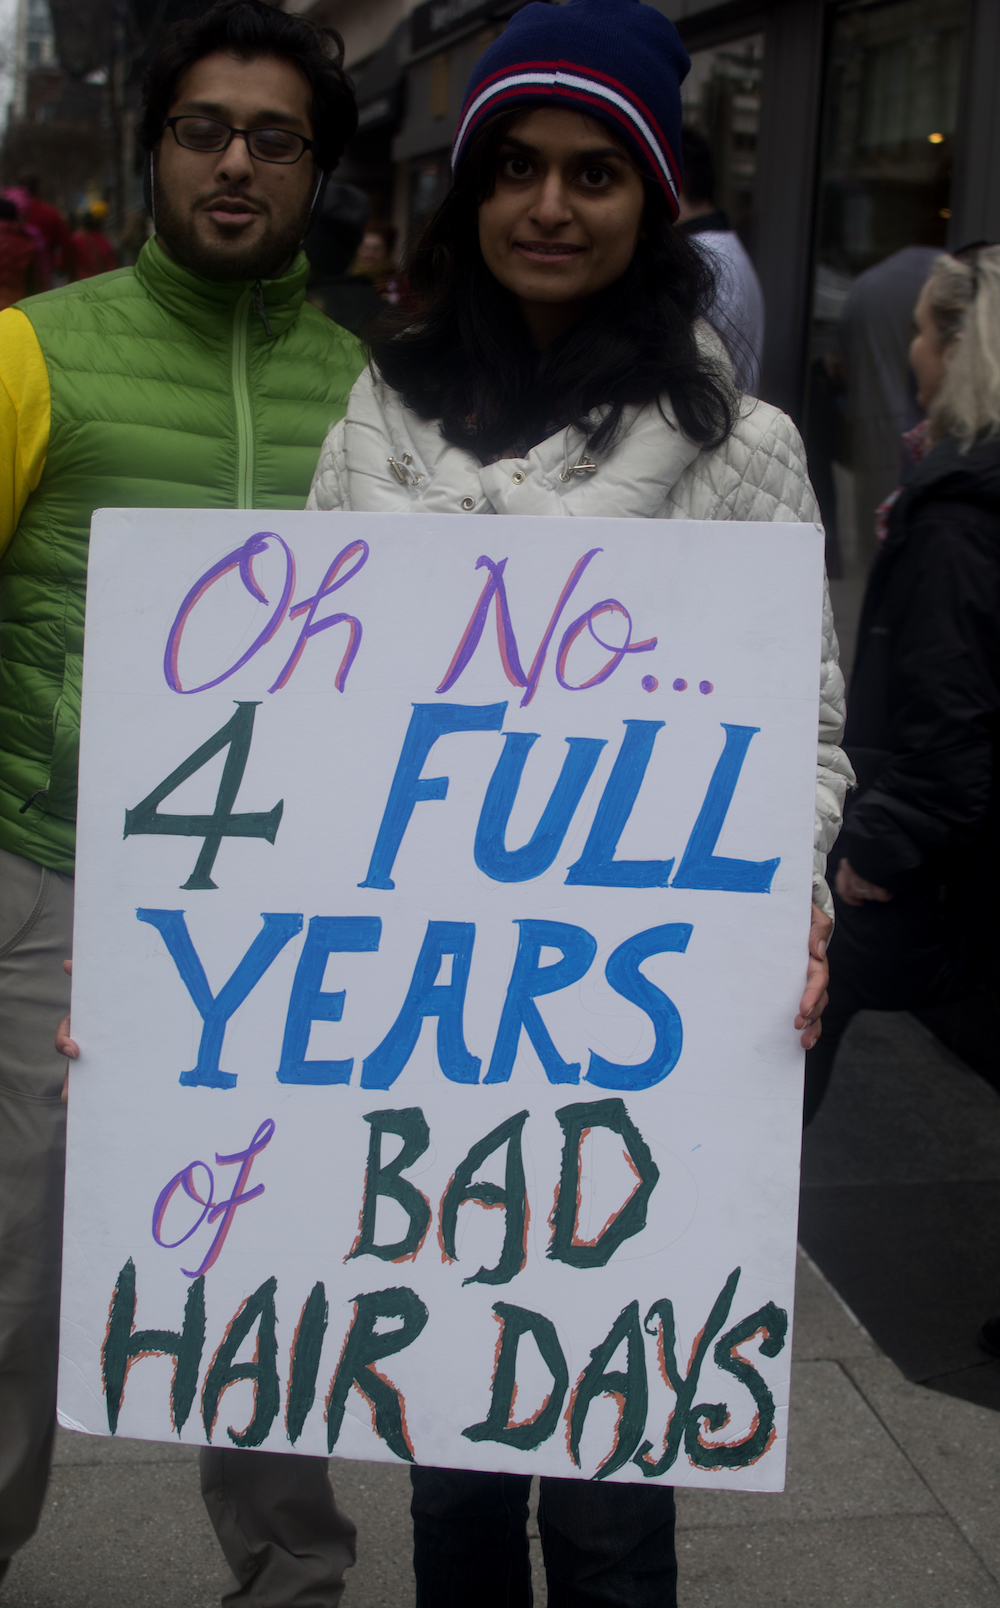 These Are the Best Protest Signs We Saw at the Women's March on Washington and New York